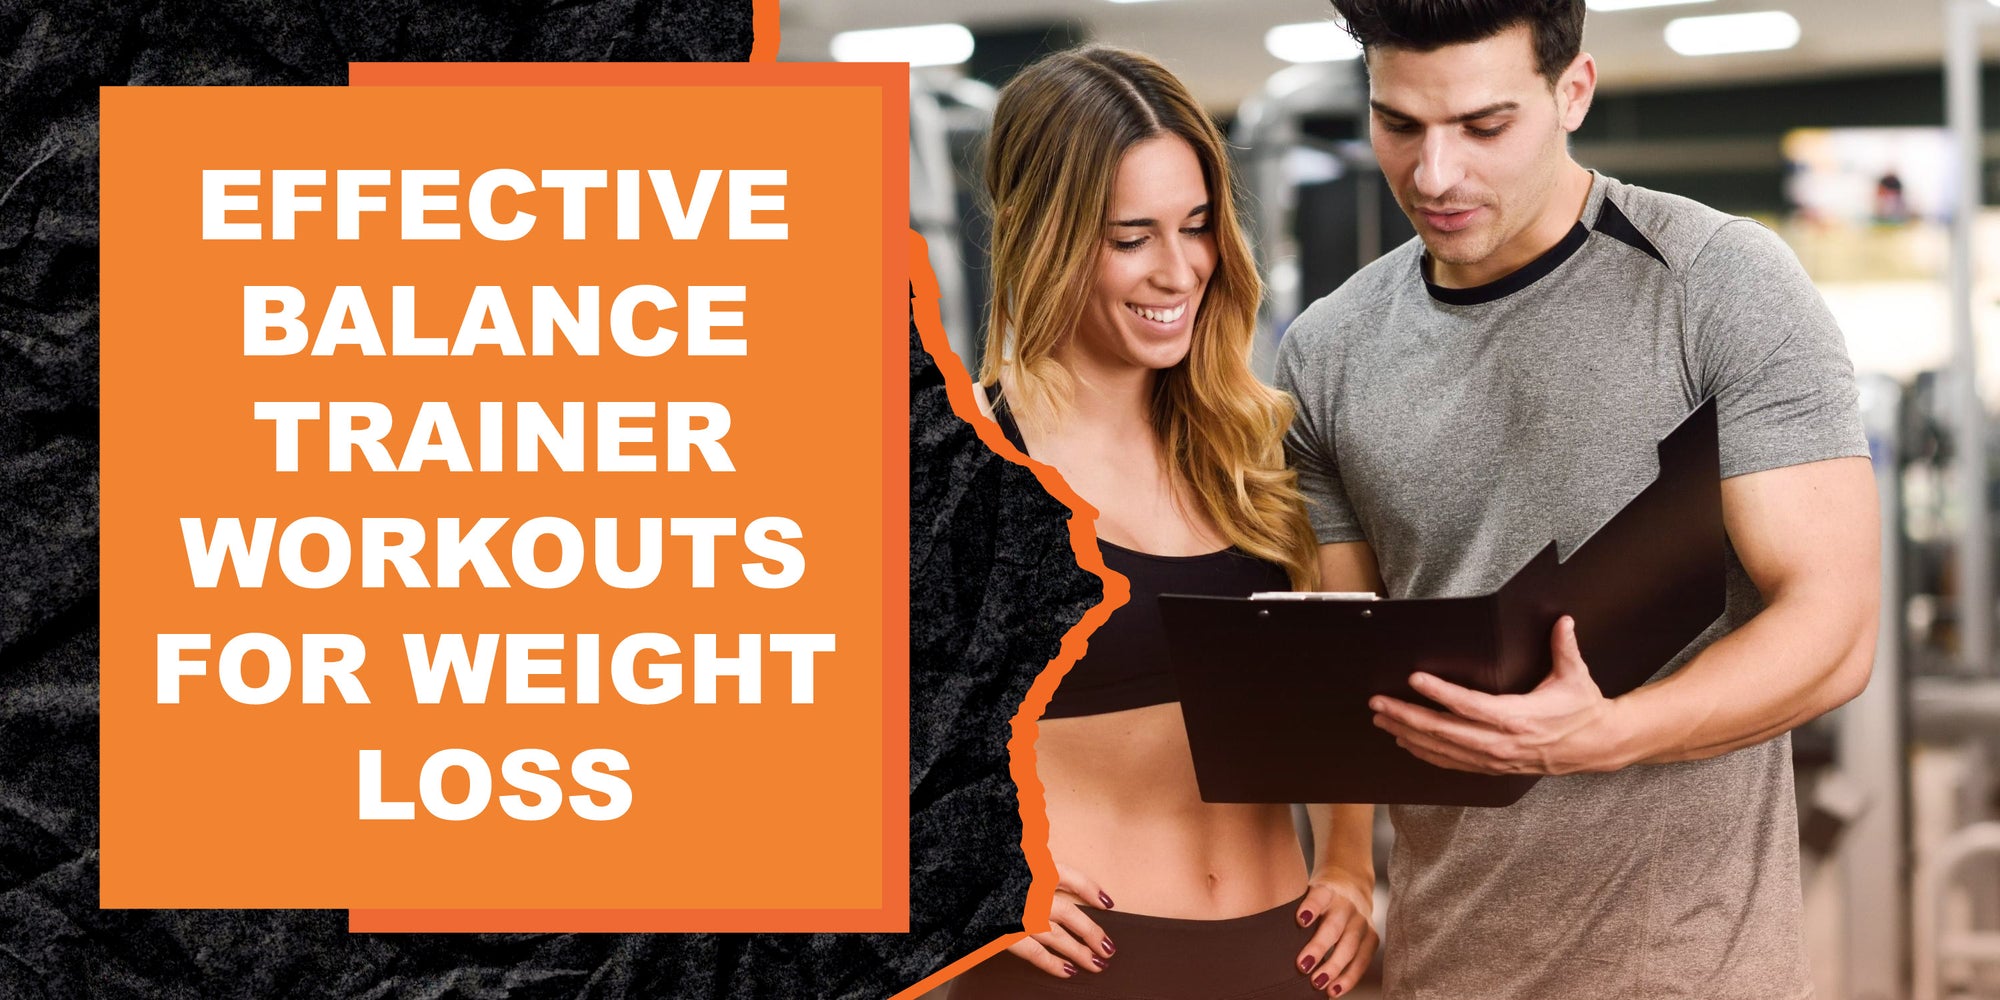 Effective Balance Trainer Workouts for Weight Loss